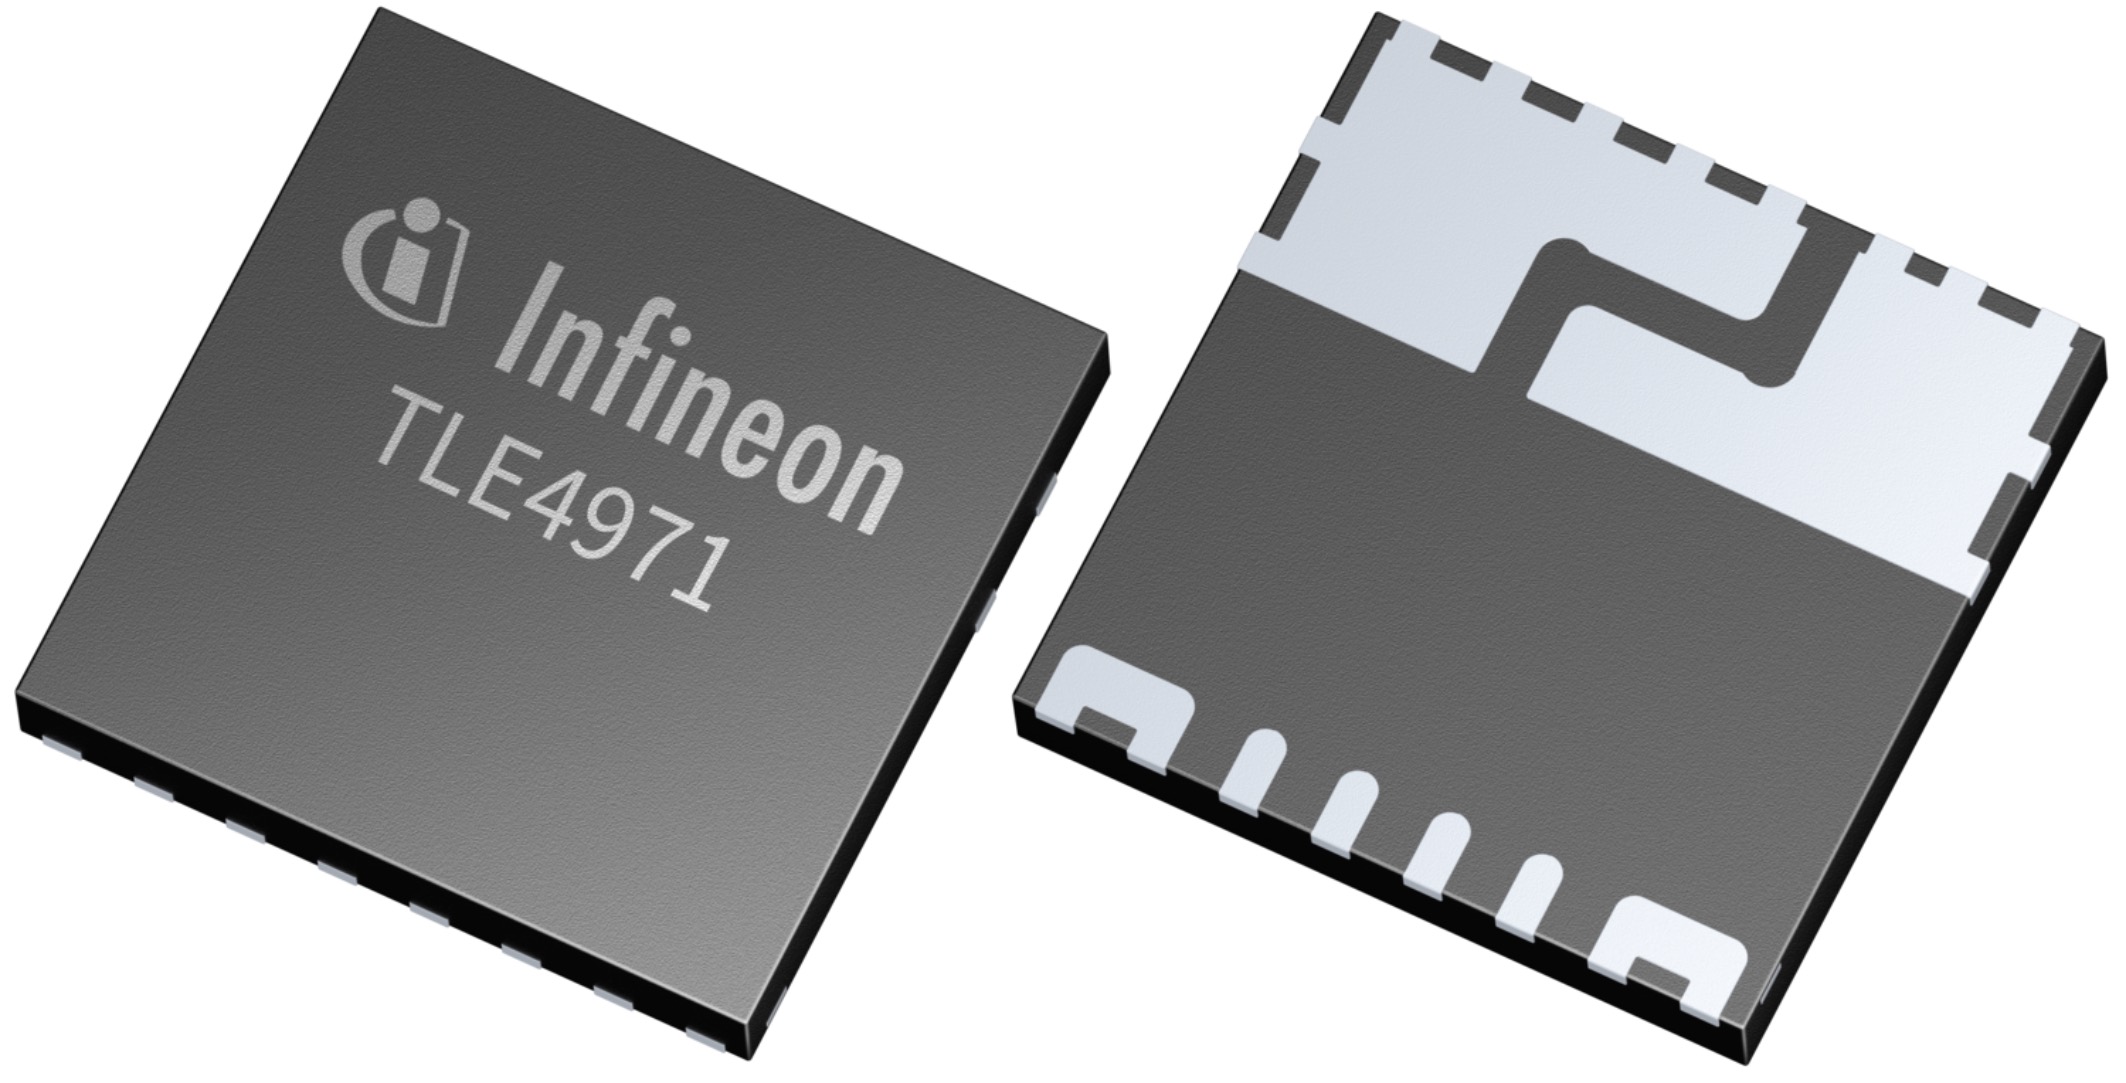 Infineon Introduces New XENSIV TLE4971 Sensor Family for Automotive Applications